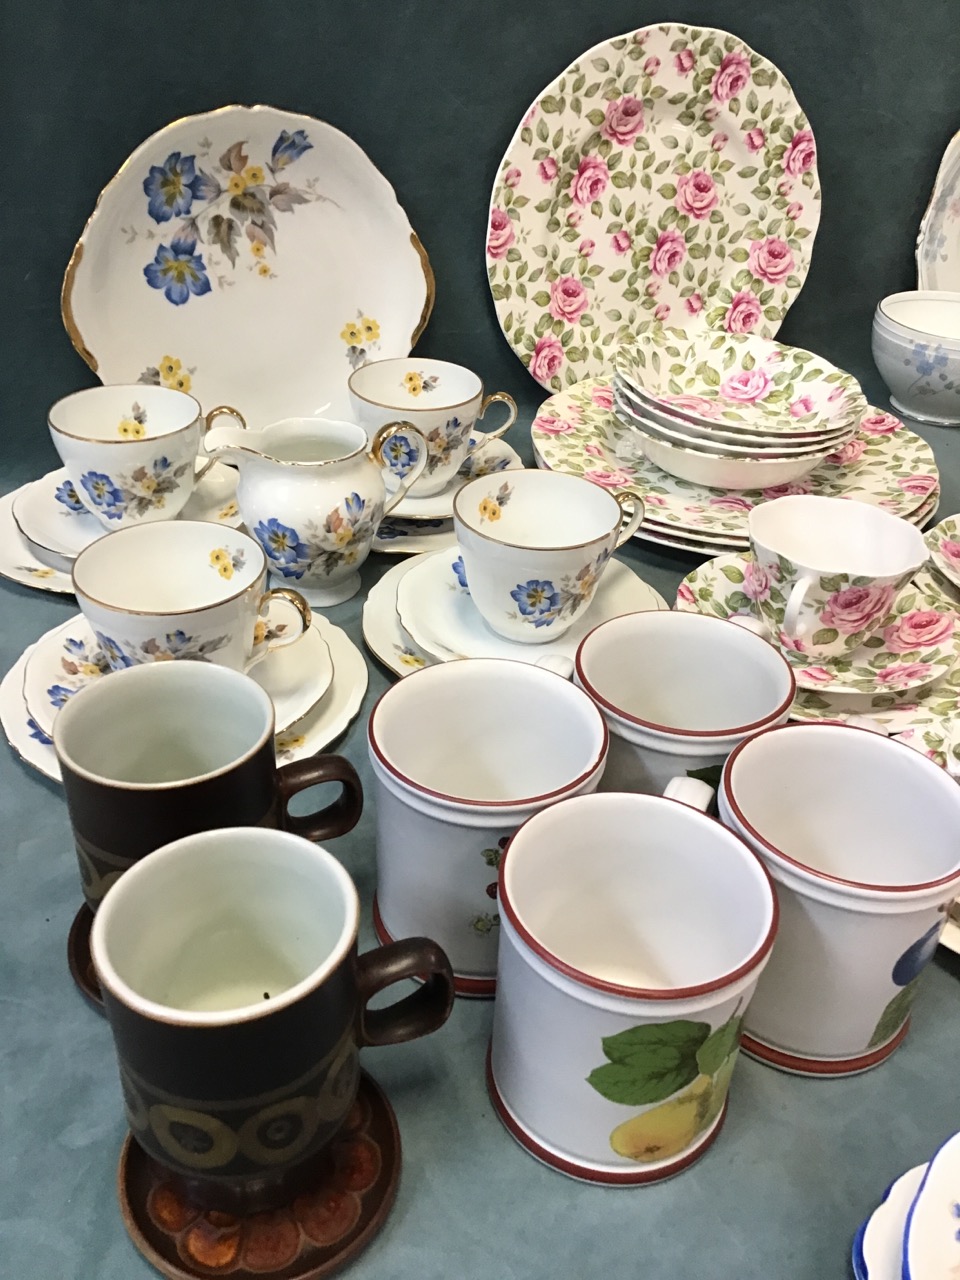 Miscellaneous tea services - Grafton in the Royston pattern, Durham China decorated with gentians, - Image 2 of 3